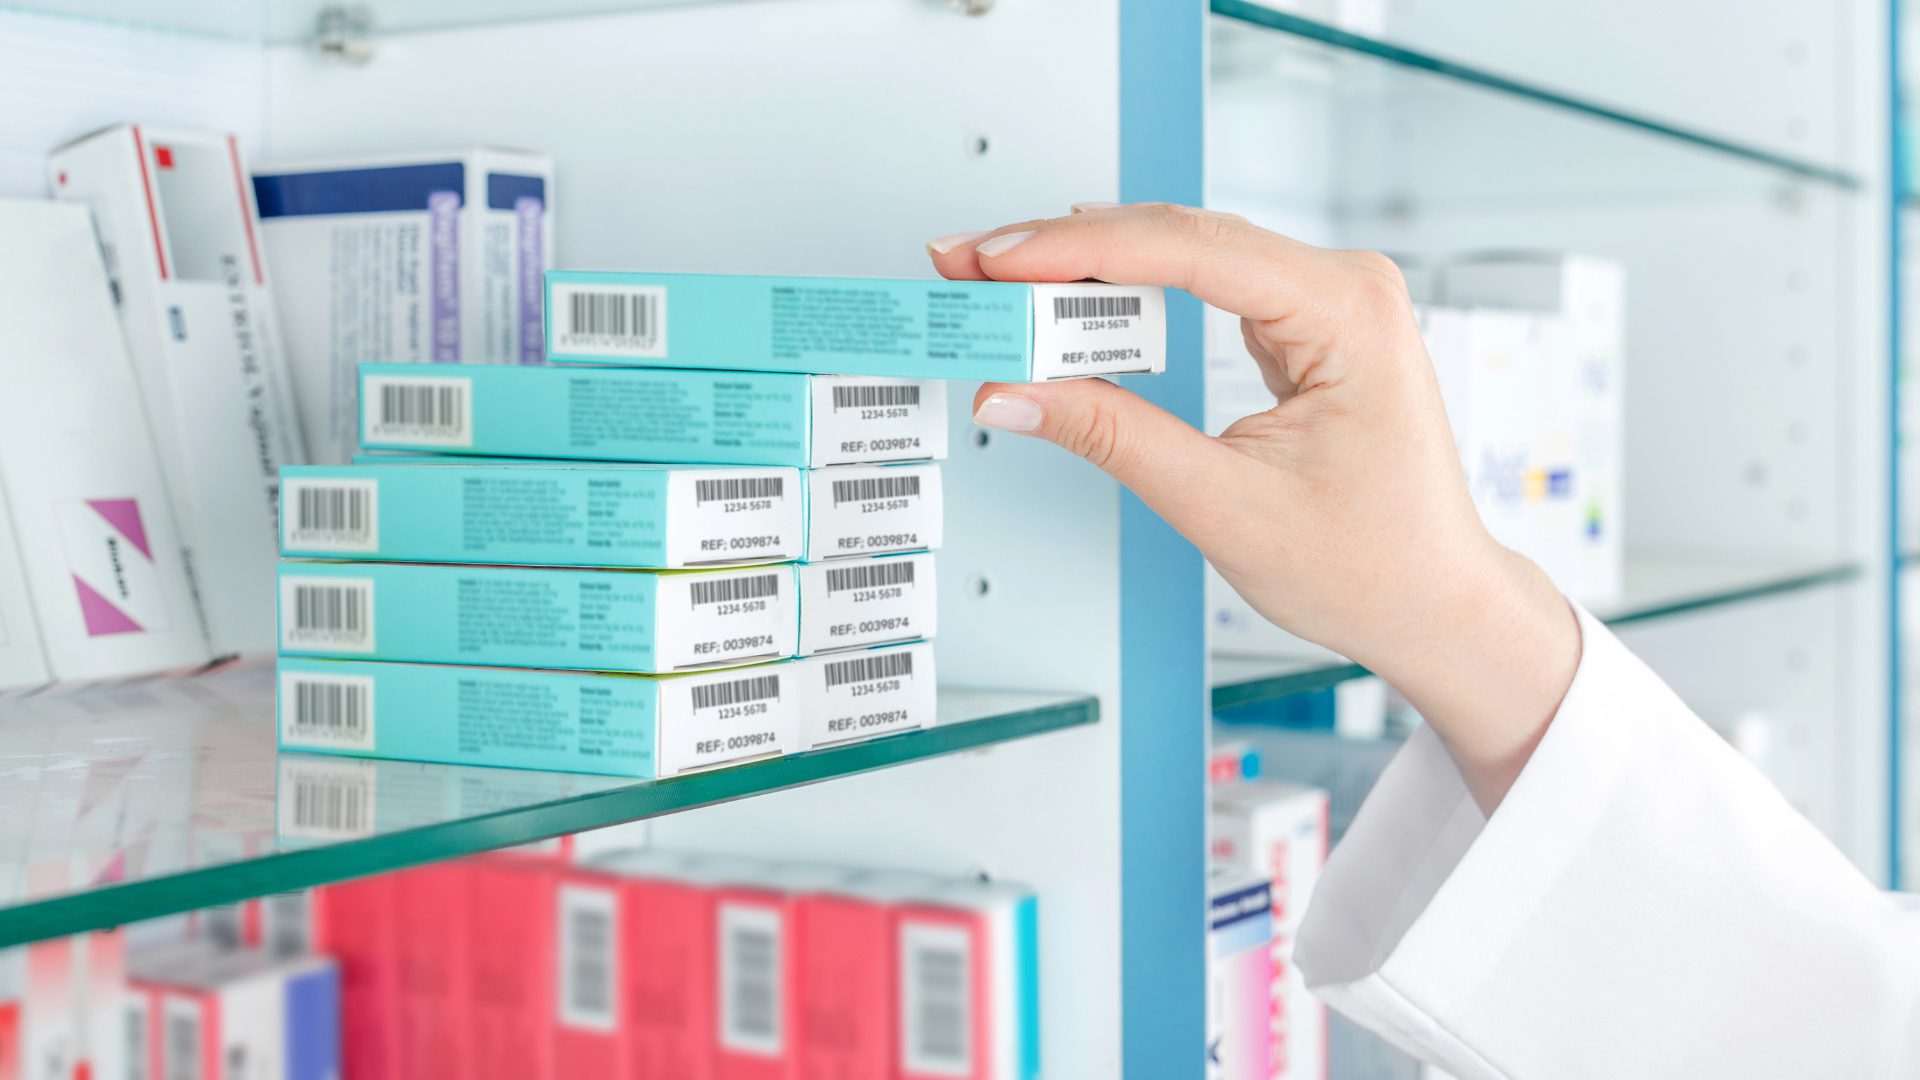 Reduce fraud medicines with serialization